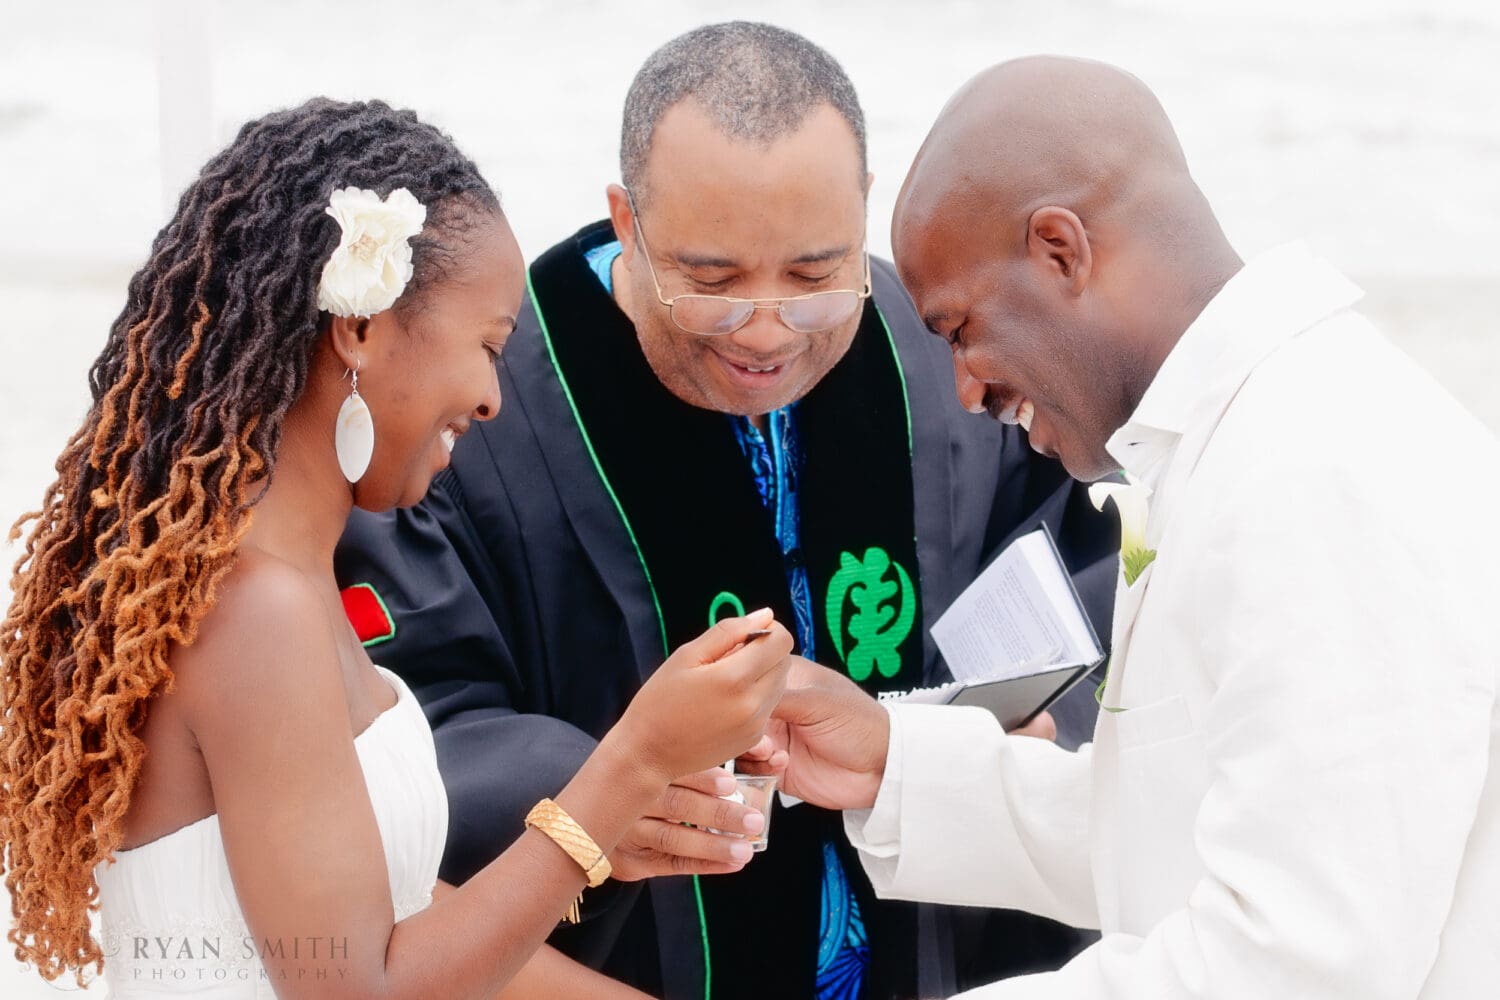 Tasting spices during wedding ceremony -